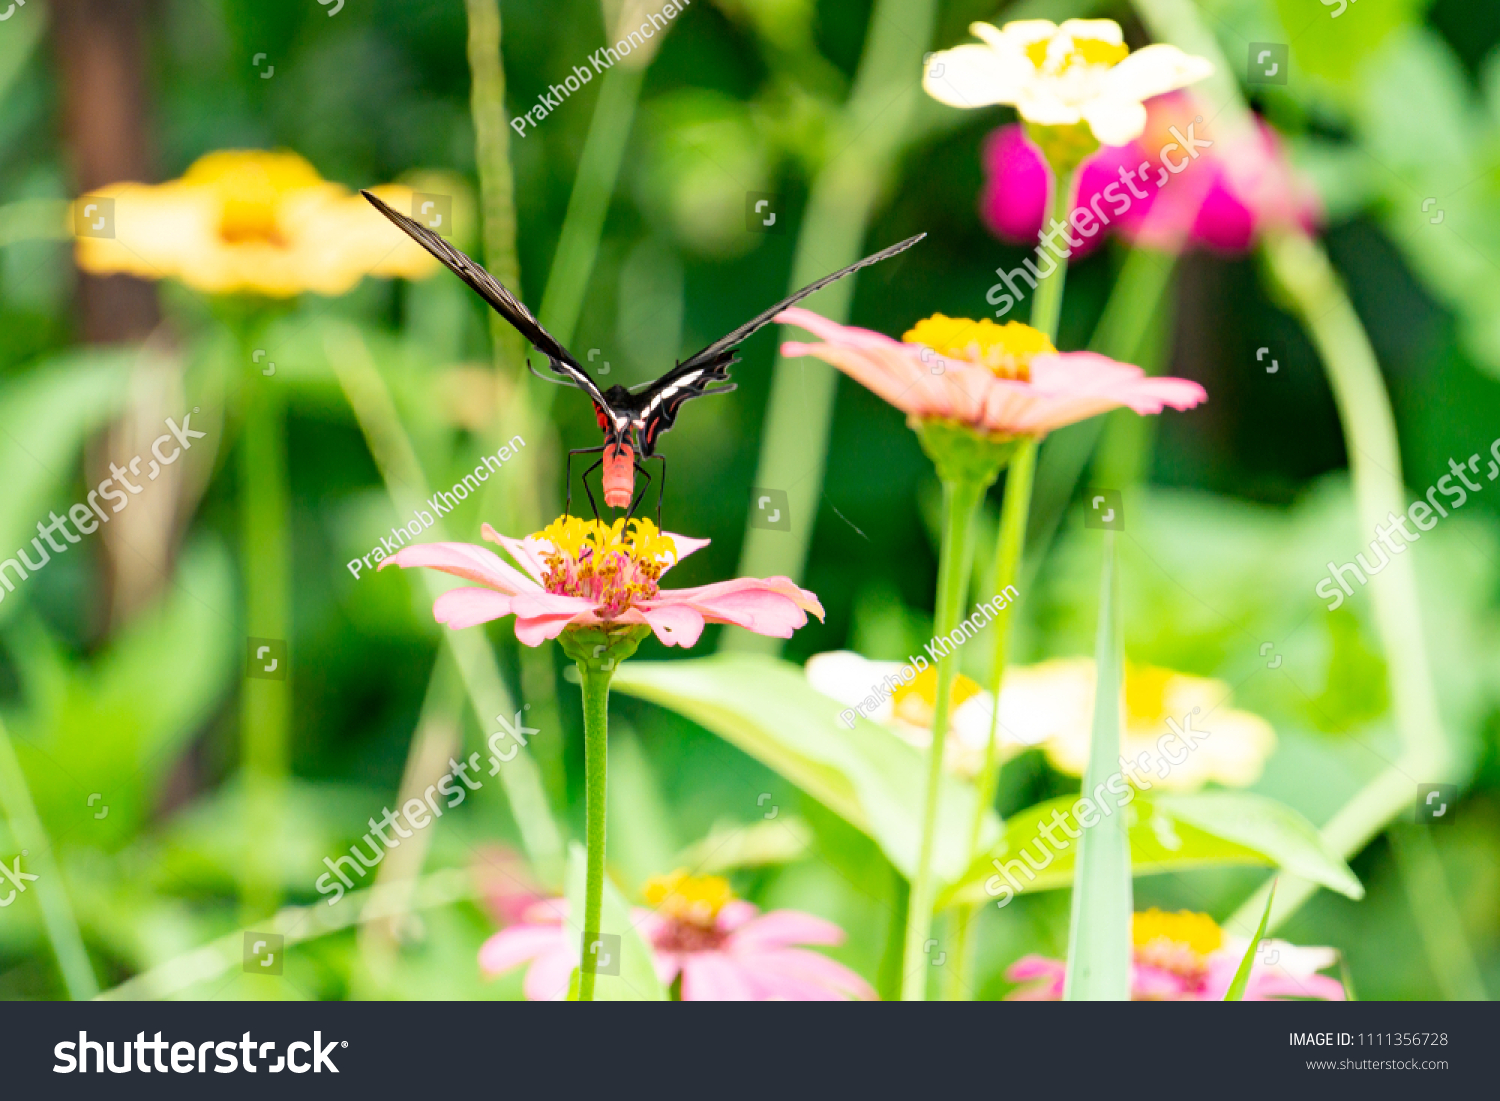 Colorful zinnia flowers,Butterfly drinking nectar from zinnia flowers on the spring morning,Thailand #1111356728